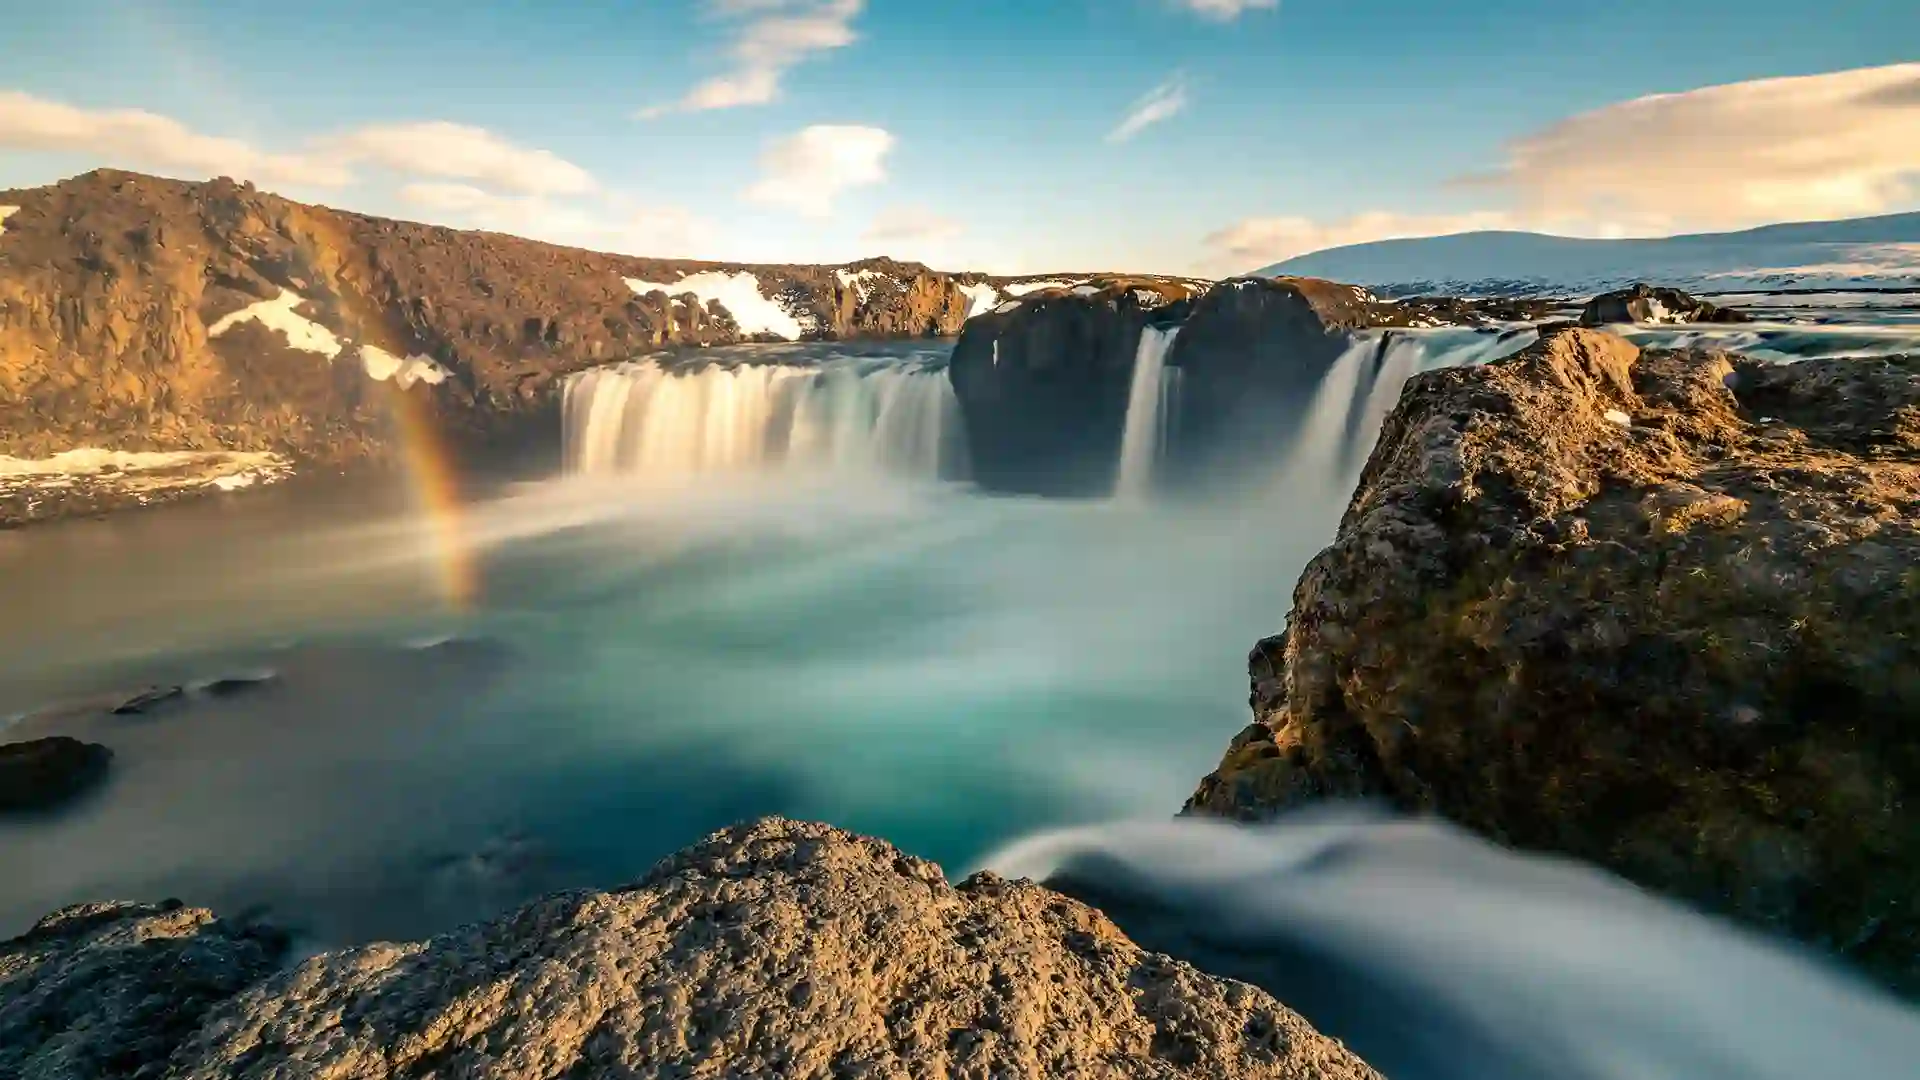 Waterfall in Iceland with rainbow and blue sky.